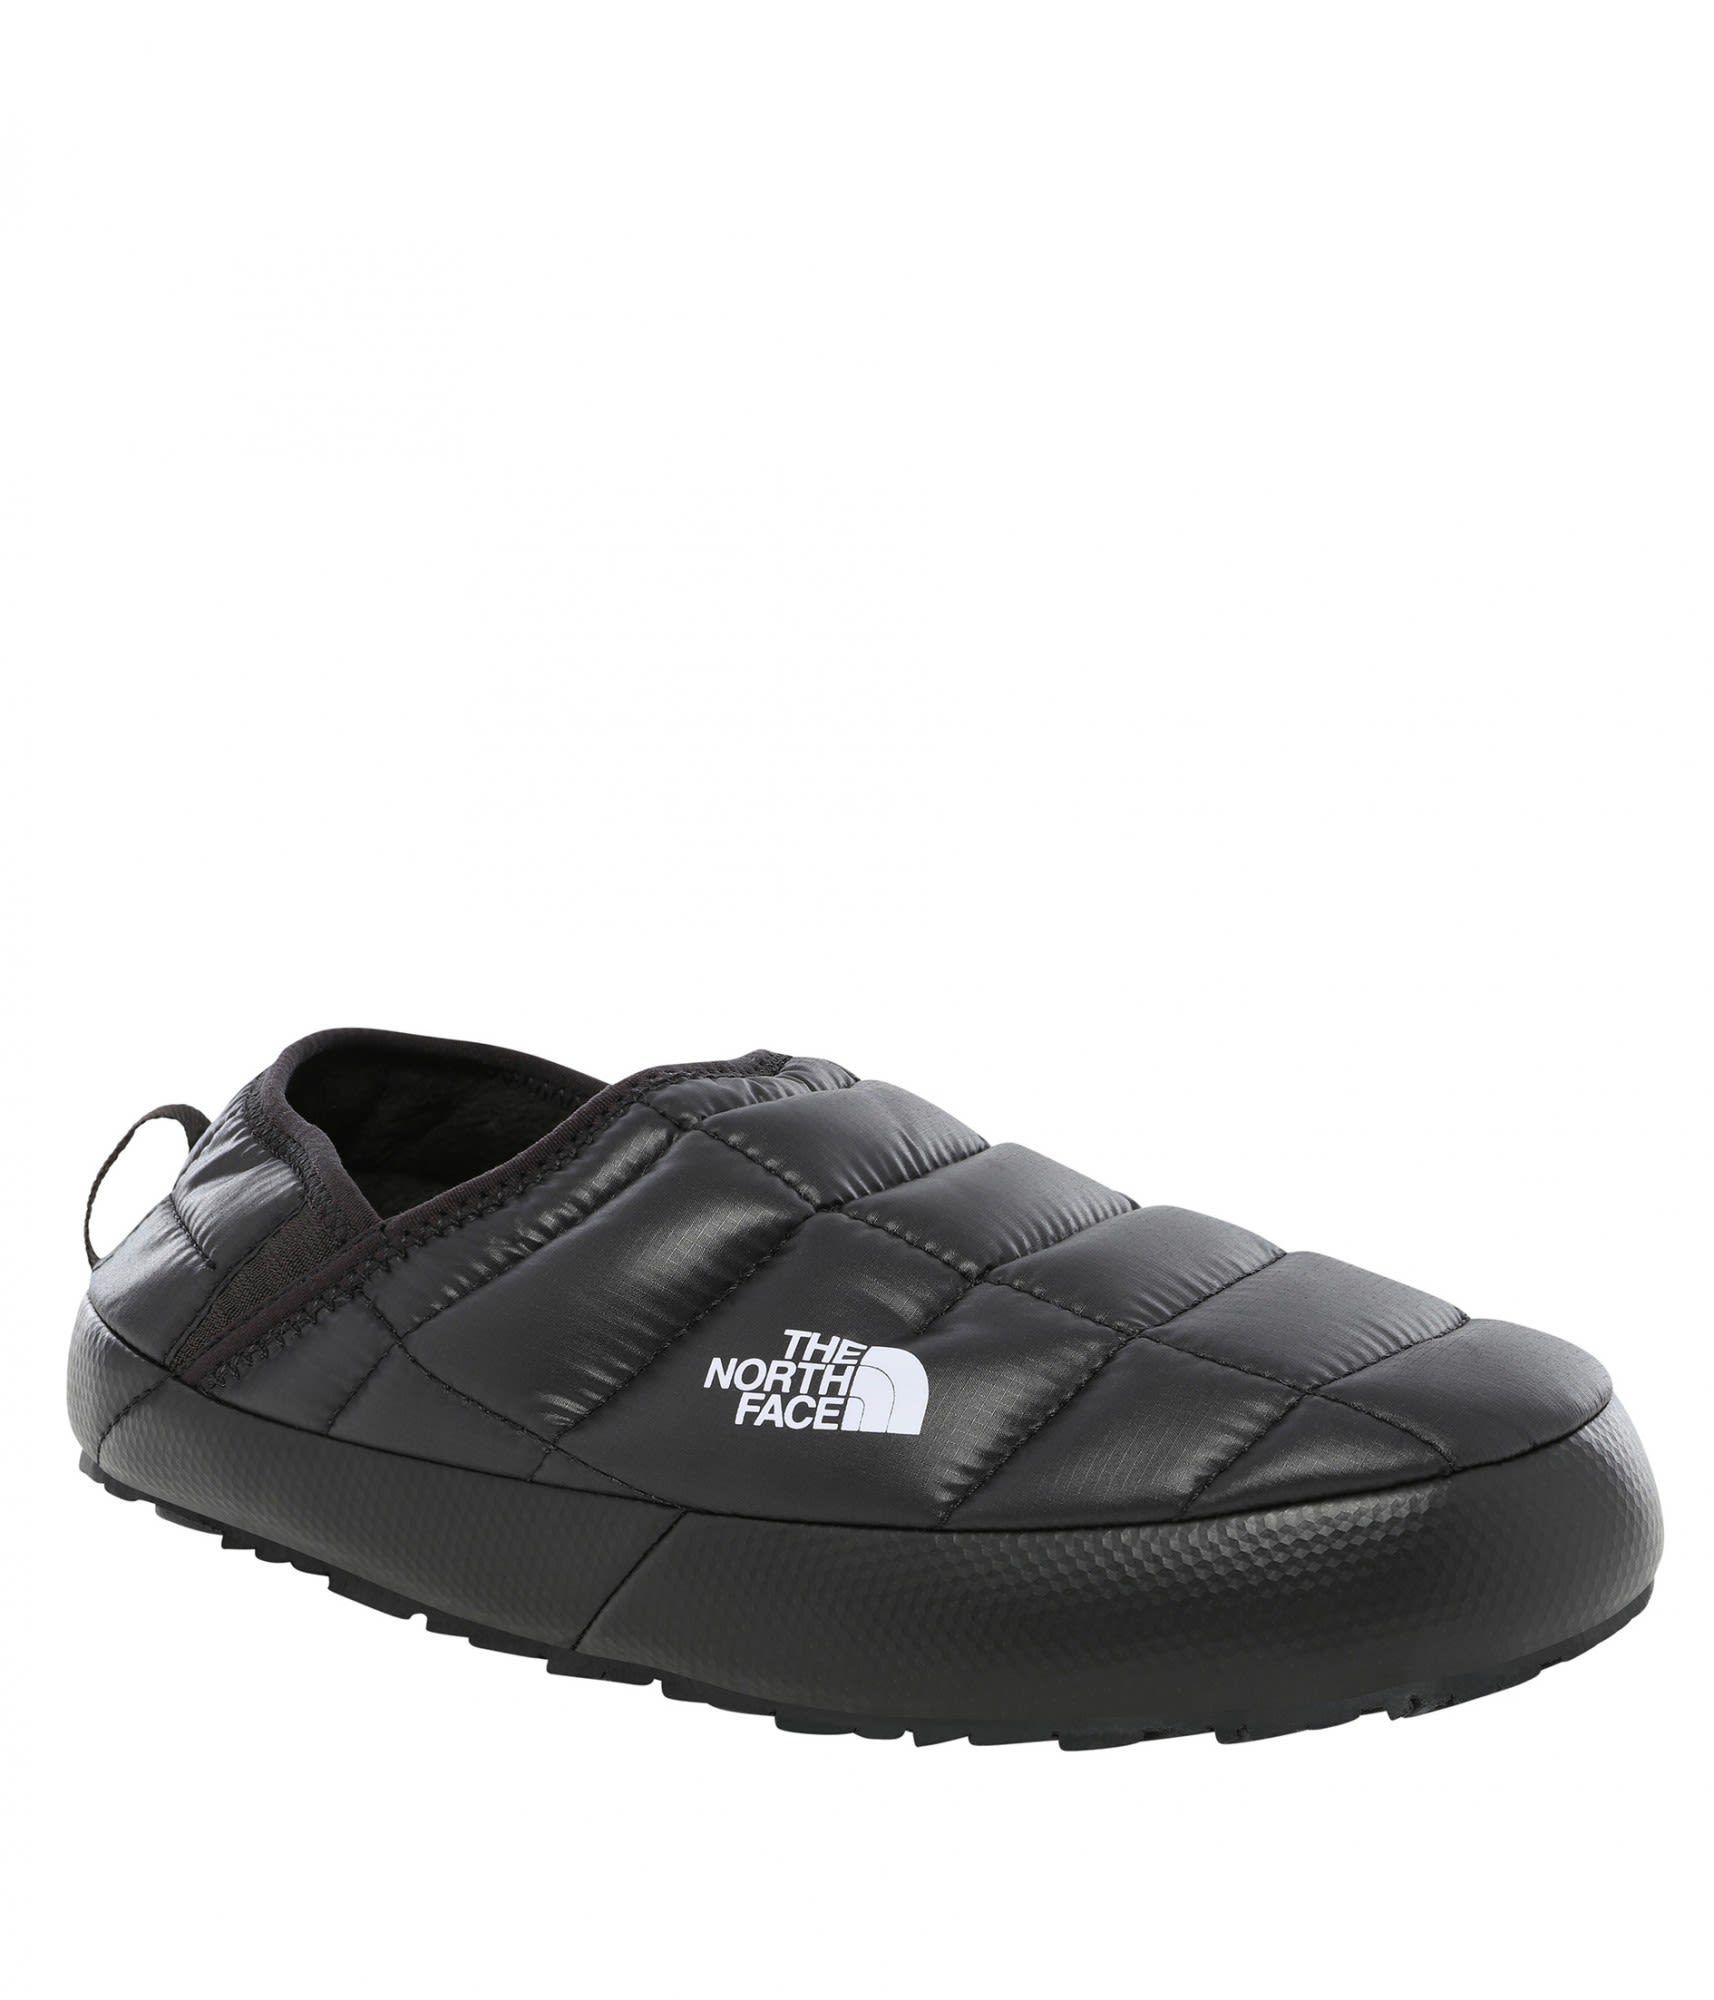 The North Face W Thermoball Traction Mule V Schwarz | Größe EU 37 | Damen Haus